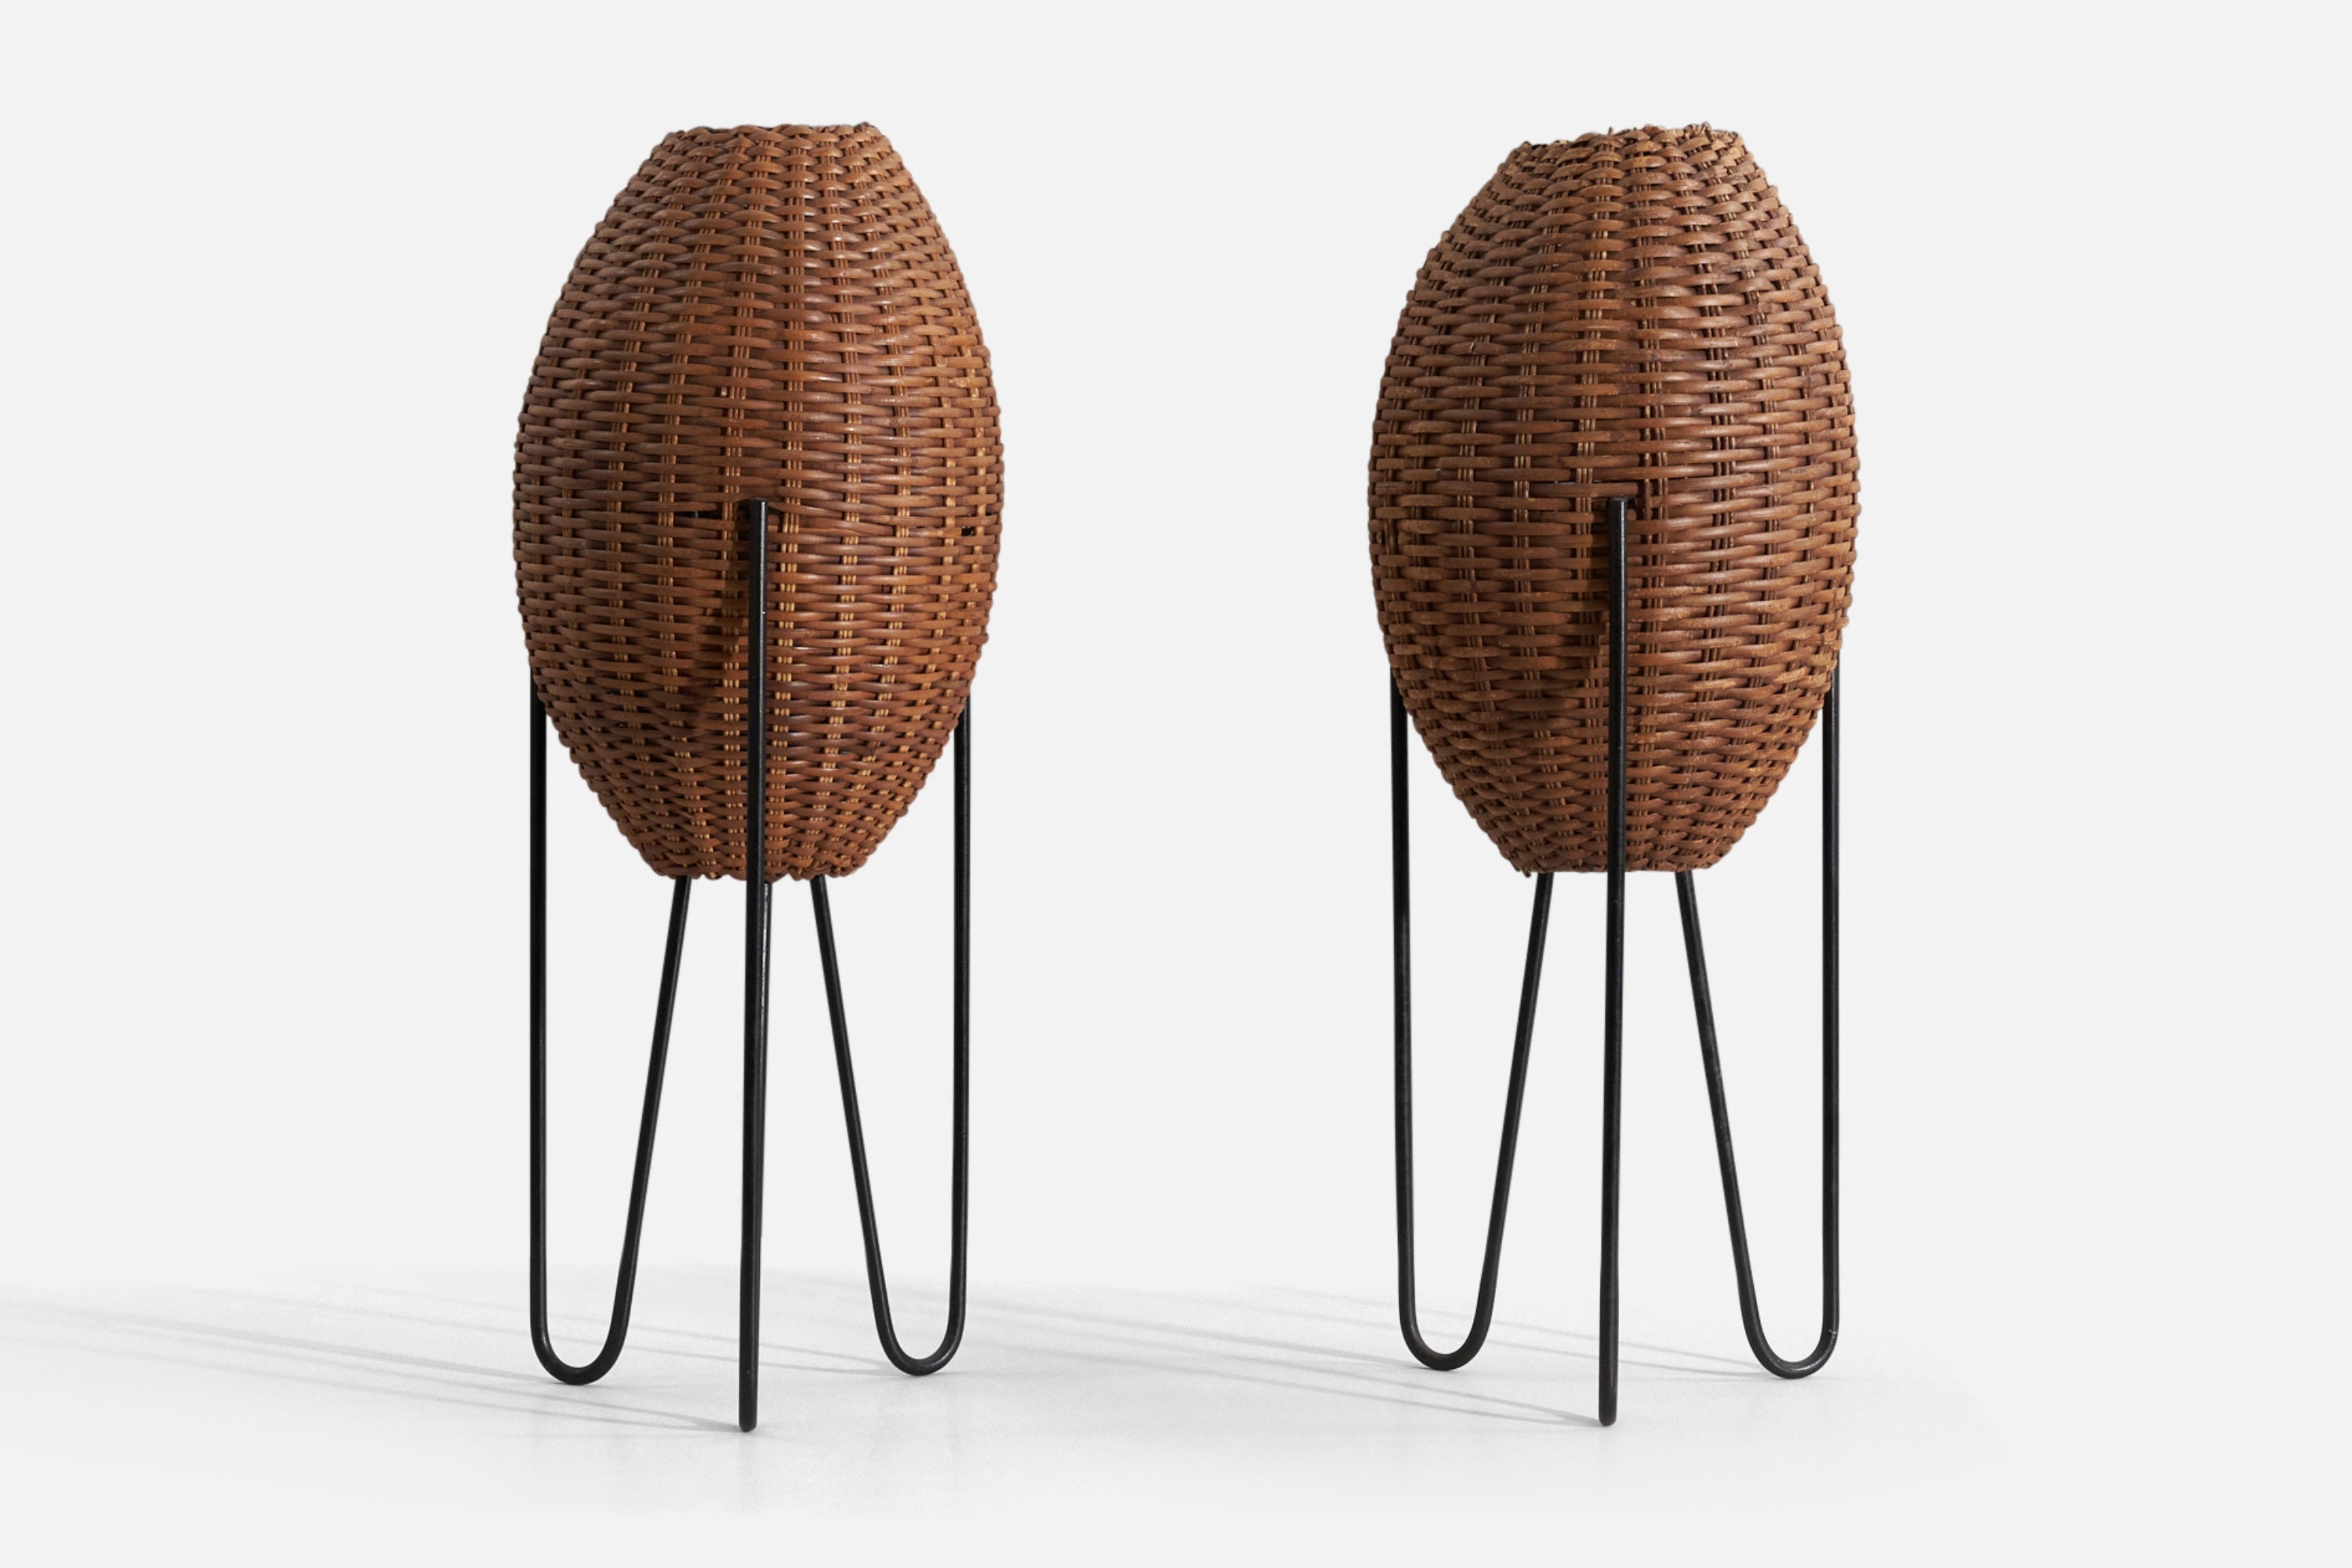 Paul Mayén, Large Table Lamps, Wicker, Enameled Metal, United States, c. 1965